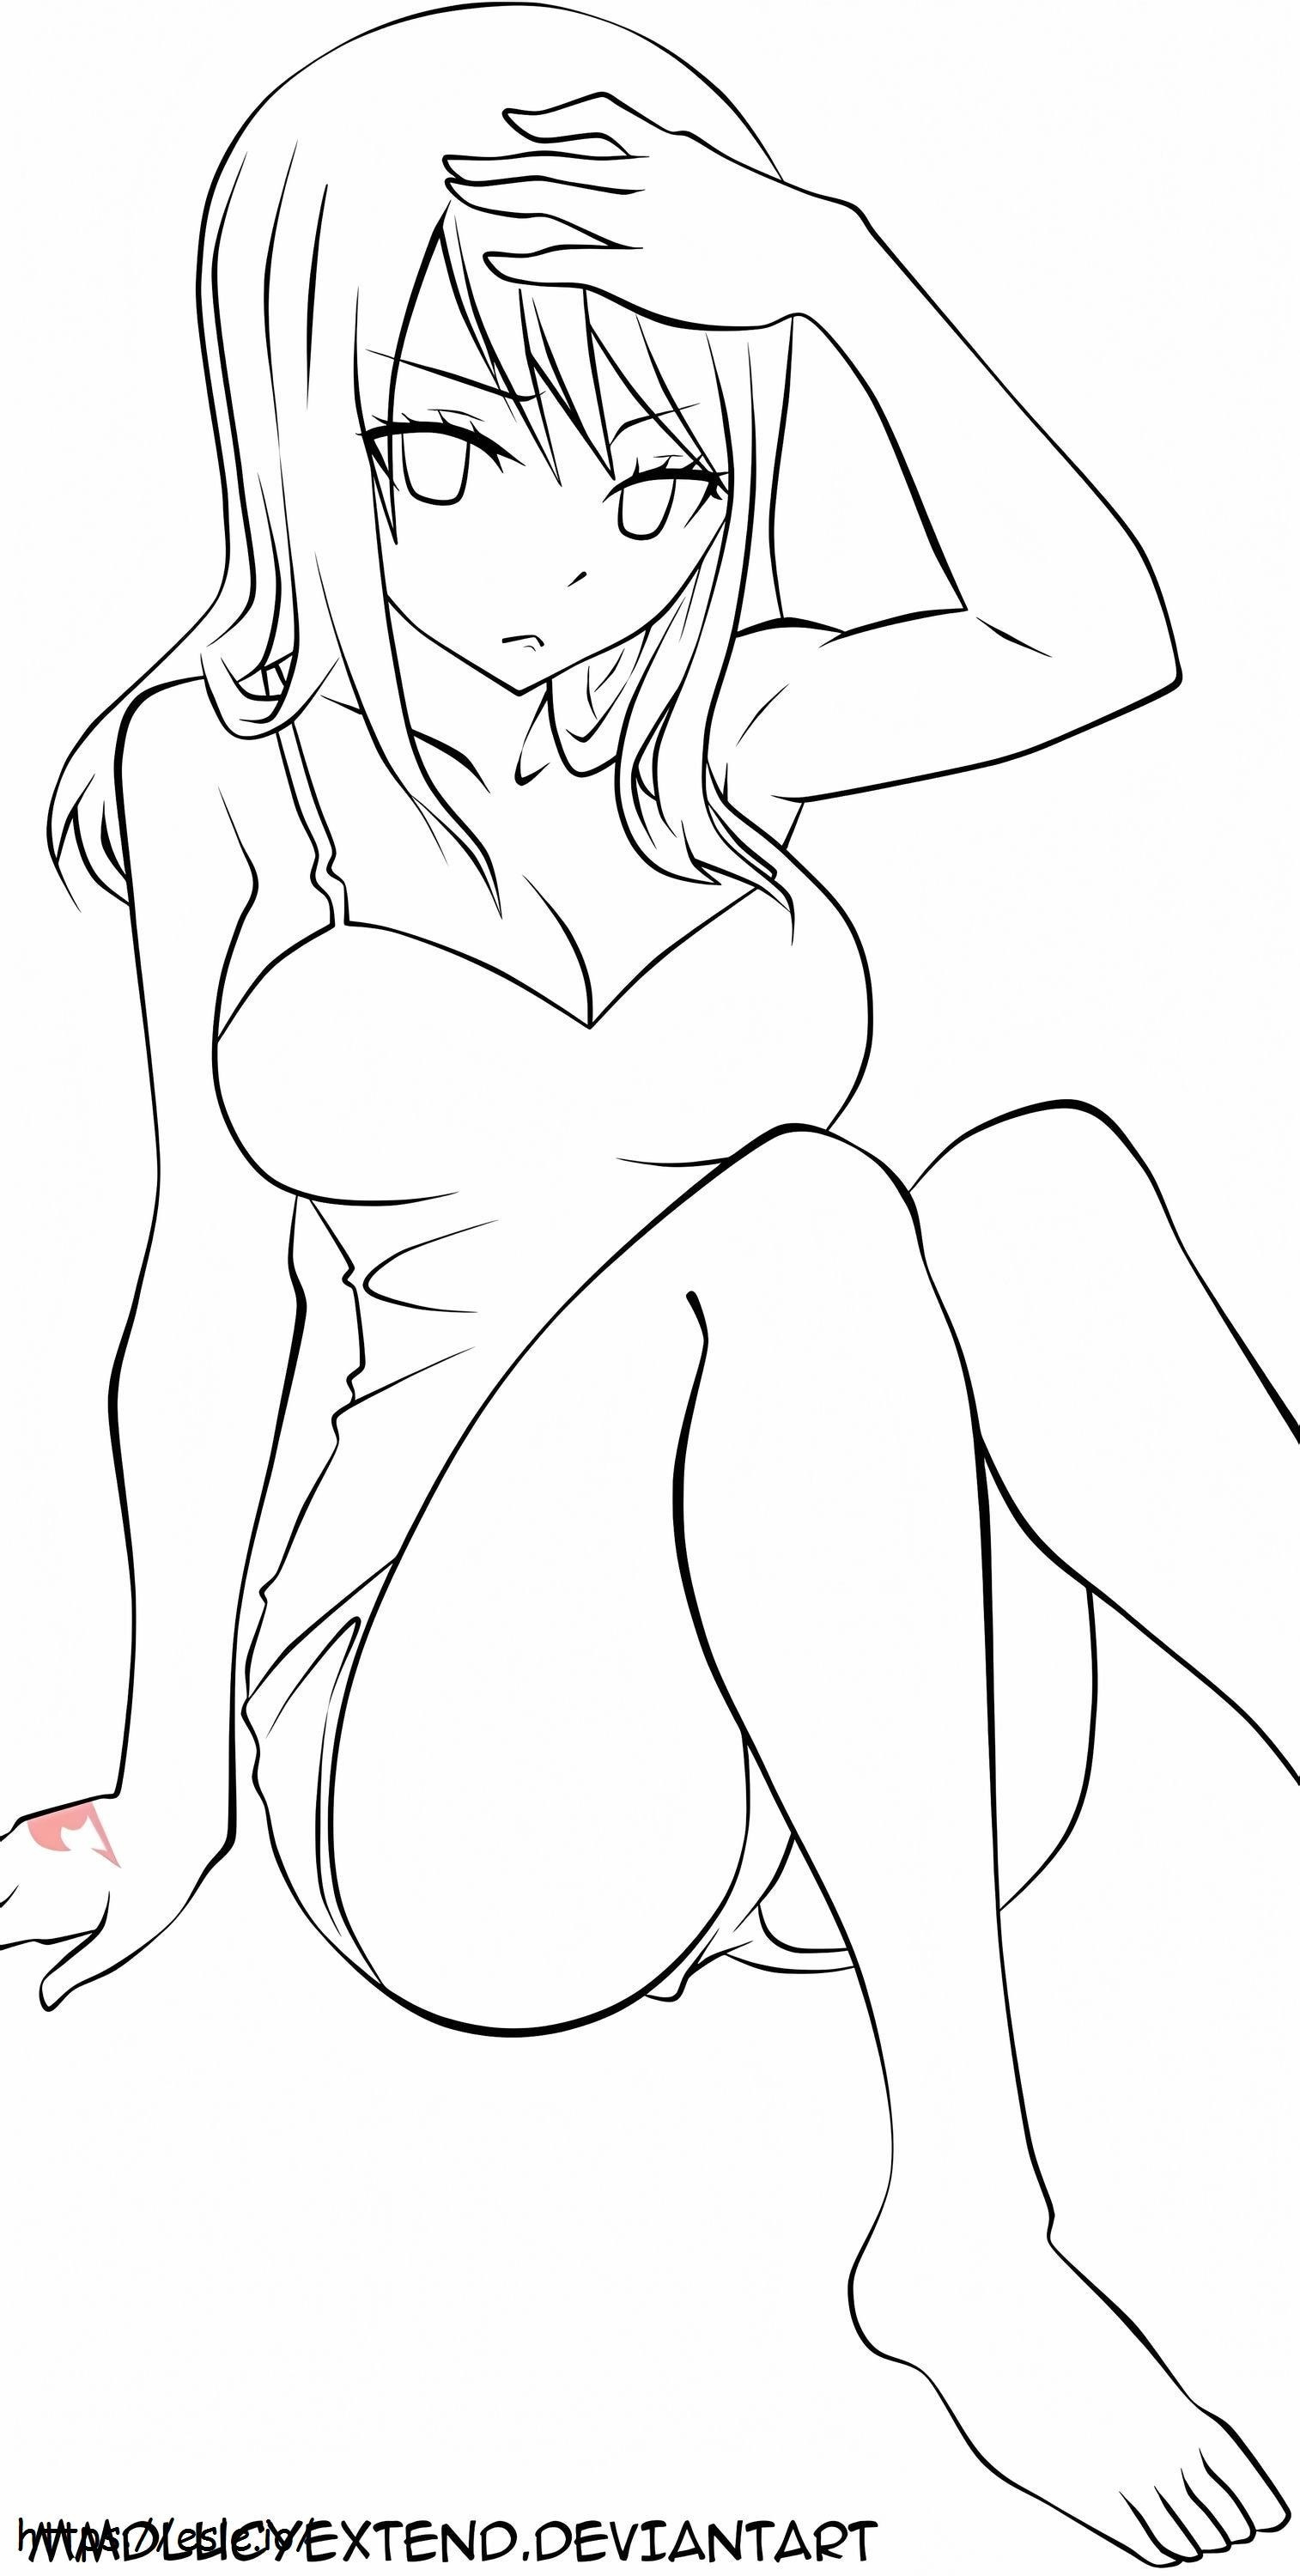 1564969815 Lucy Anime Lineart By Mmdlucyextend A4 coloring page